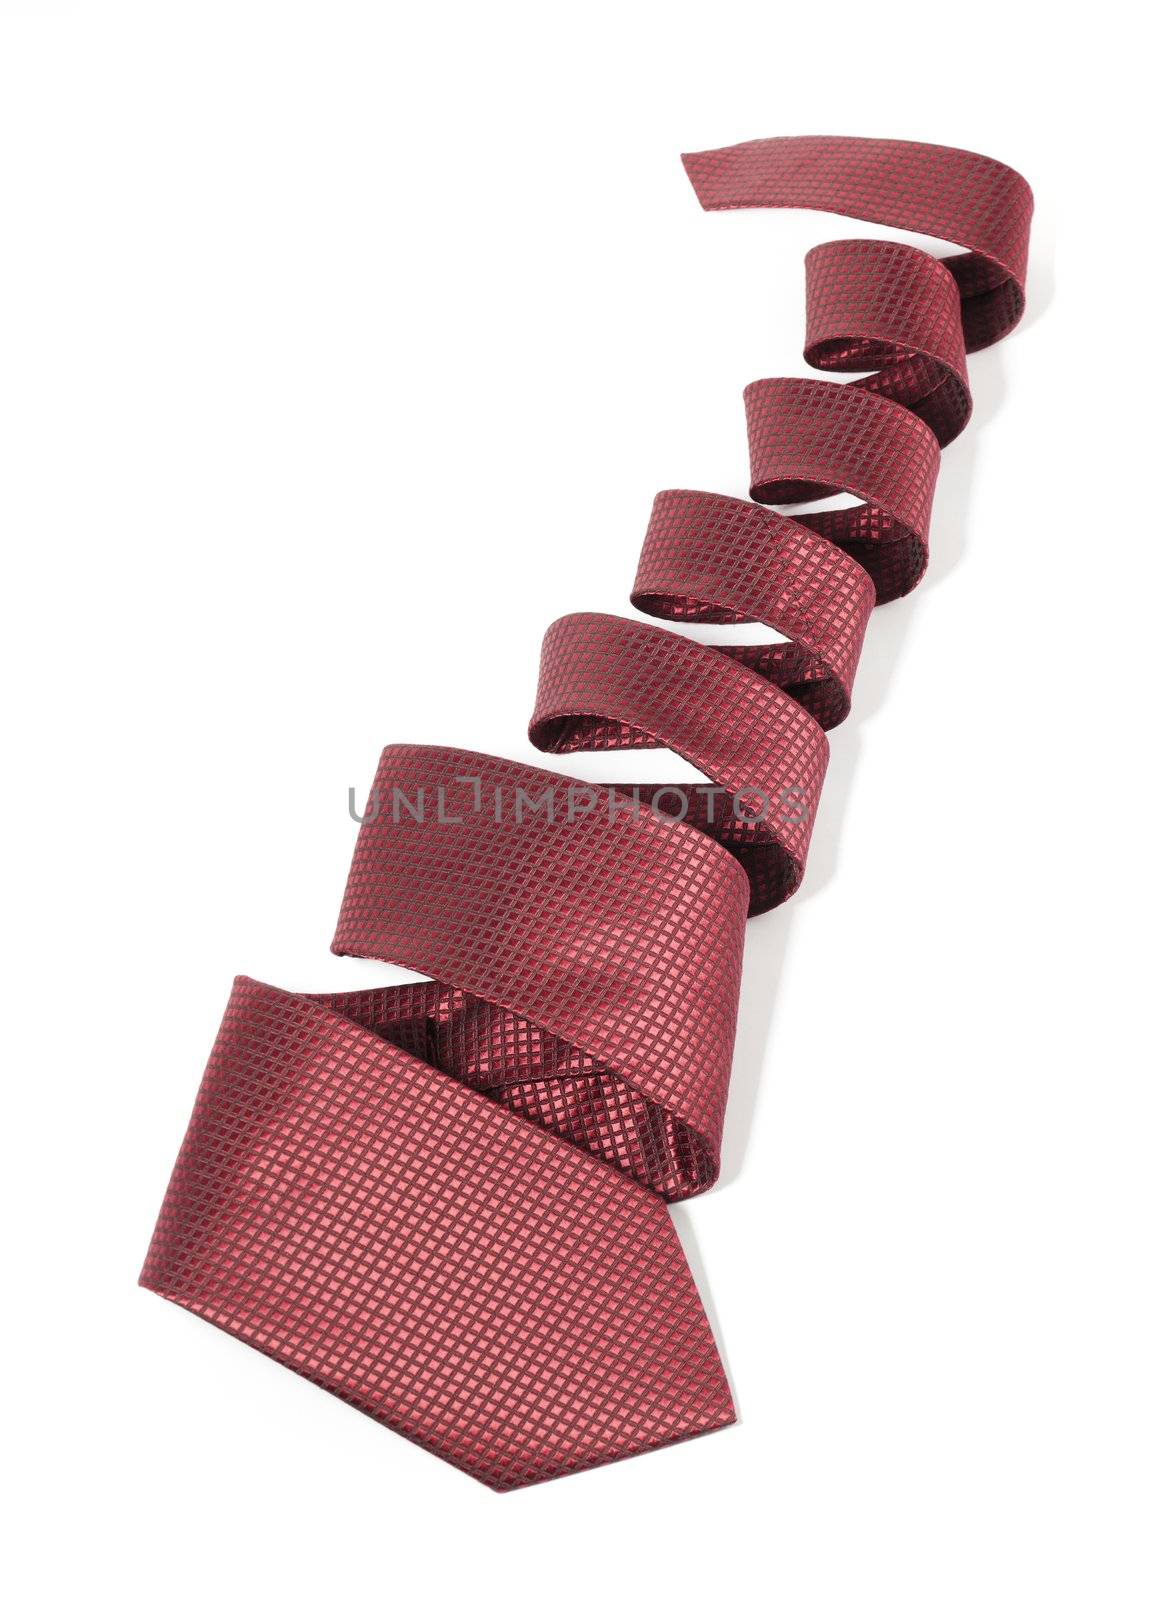 Tie by Stocksnapper